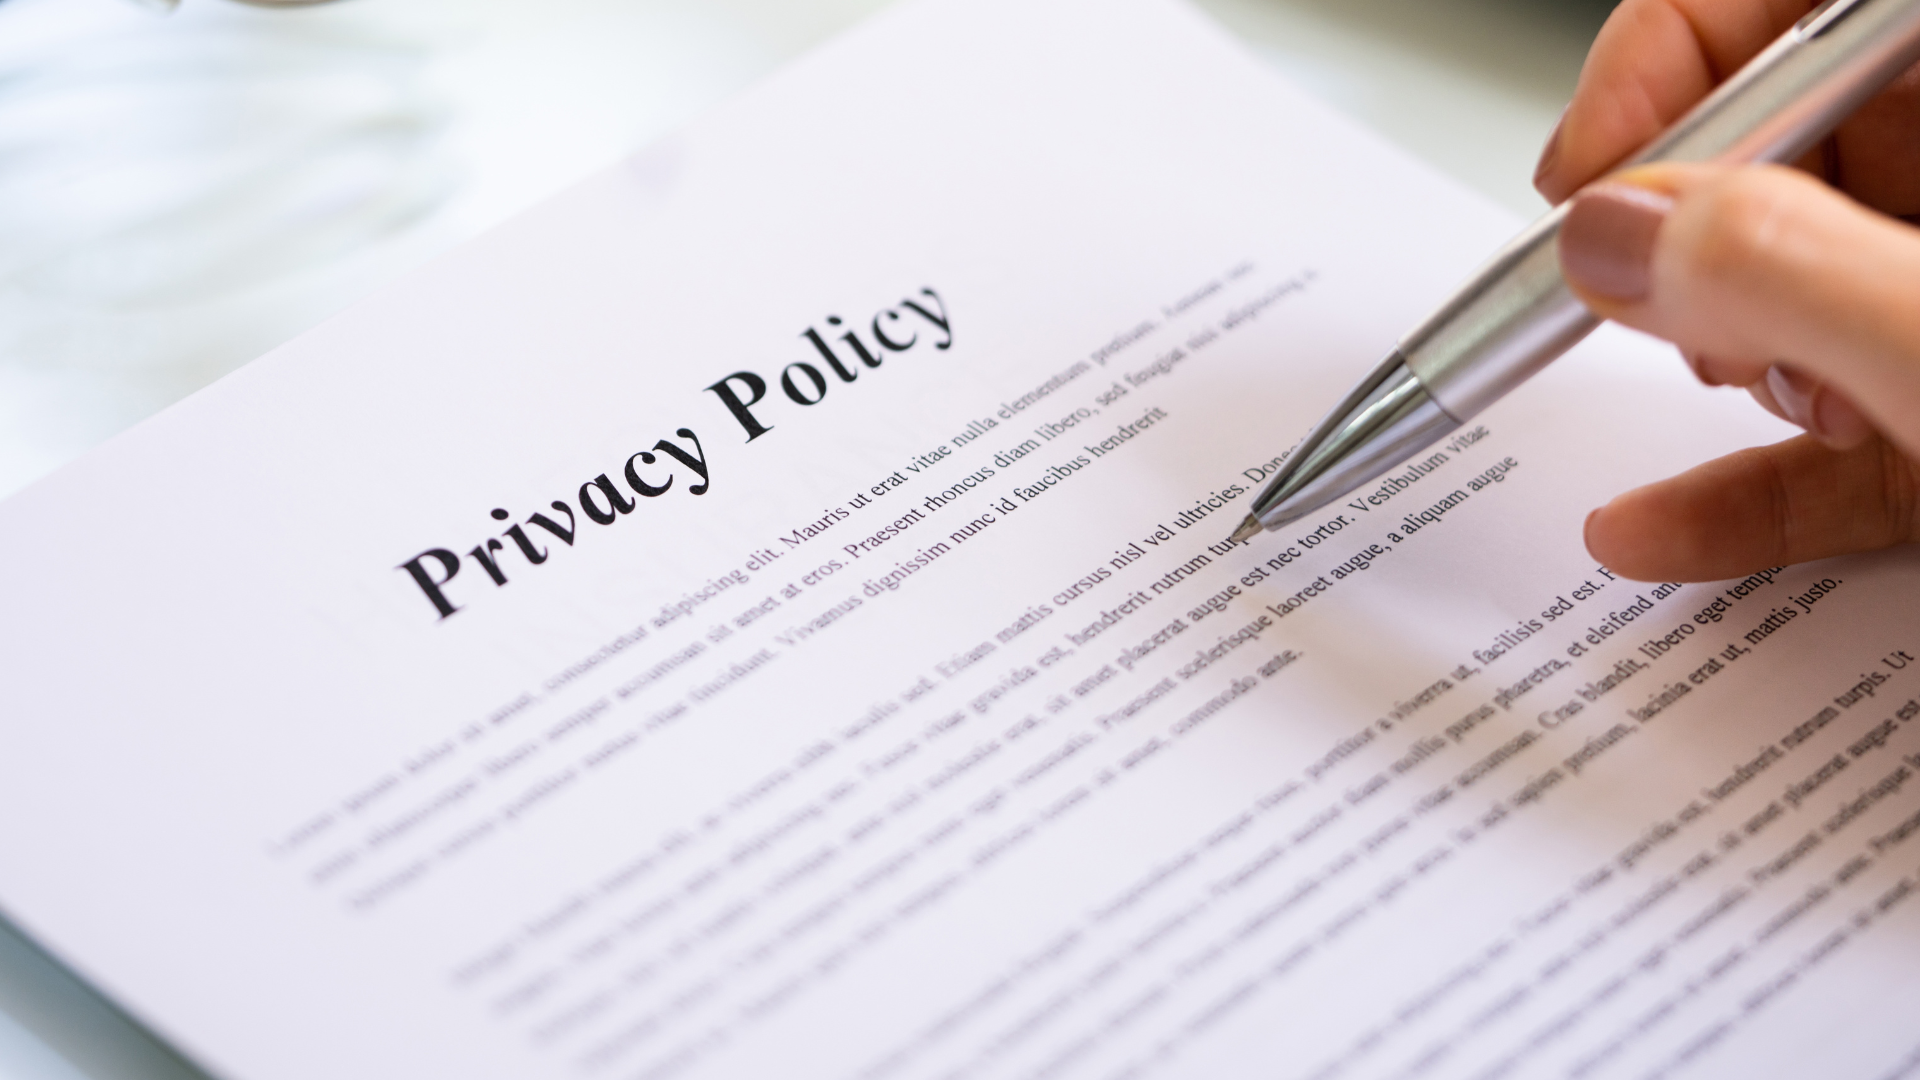 Banking privacy policy